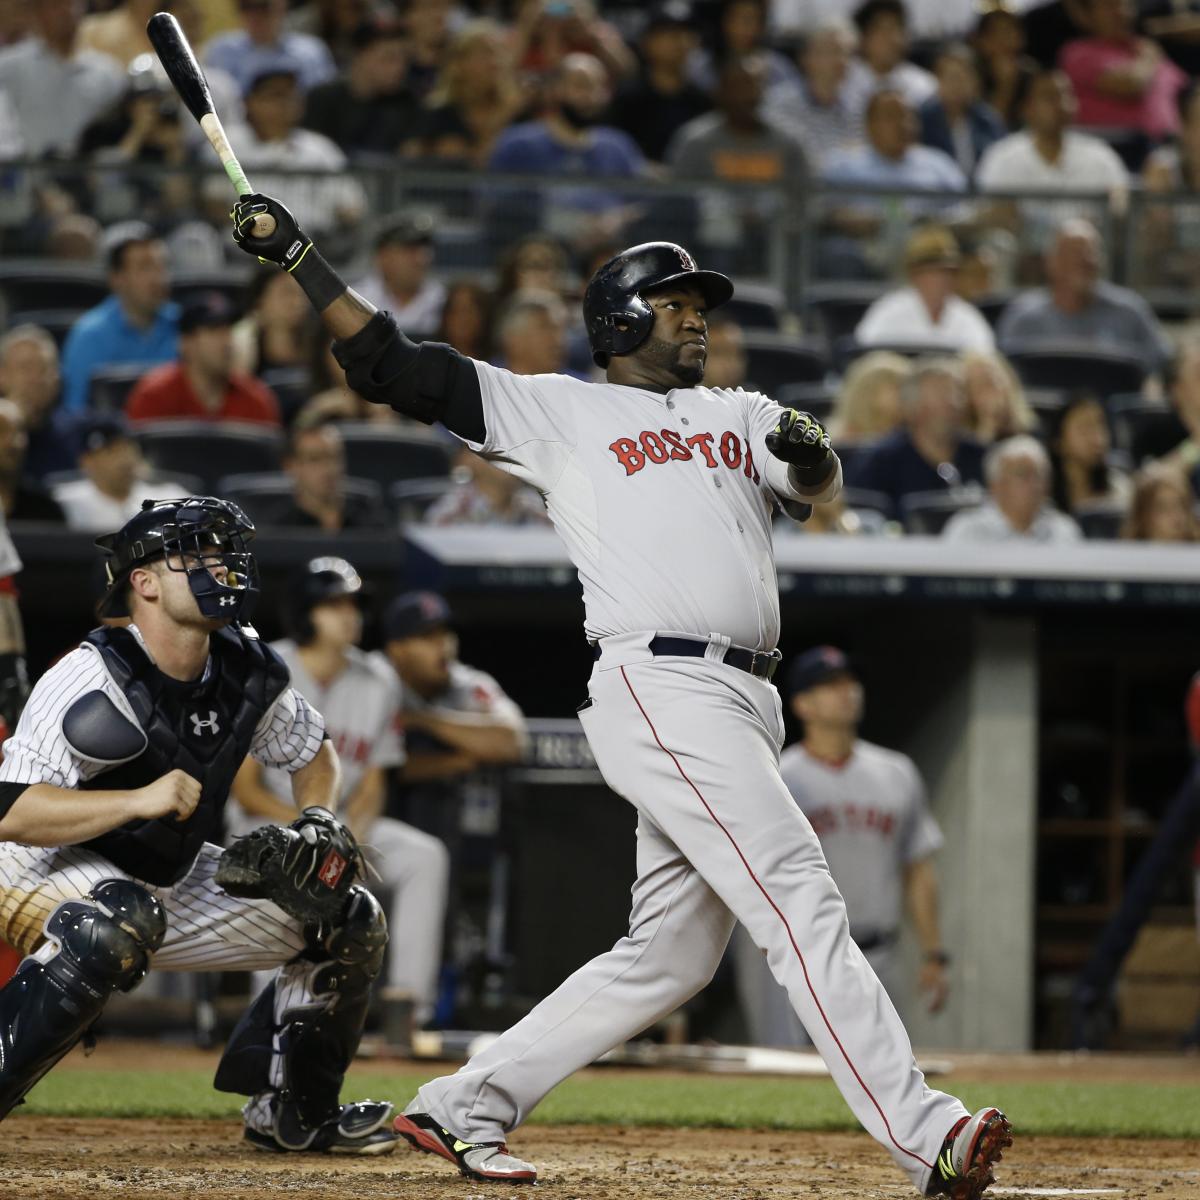 THIS DAY IN BÉISBOL July 10: David Ortiz breaks record for most hits by a  DH - Latino Baseball